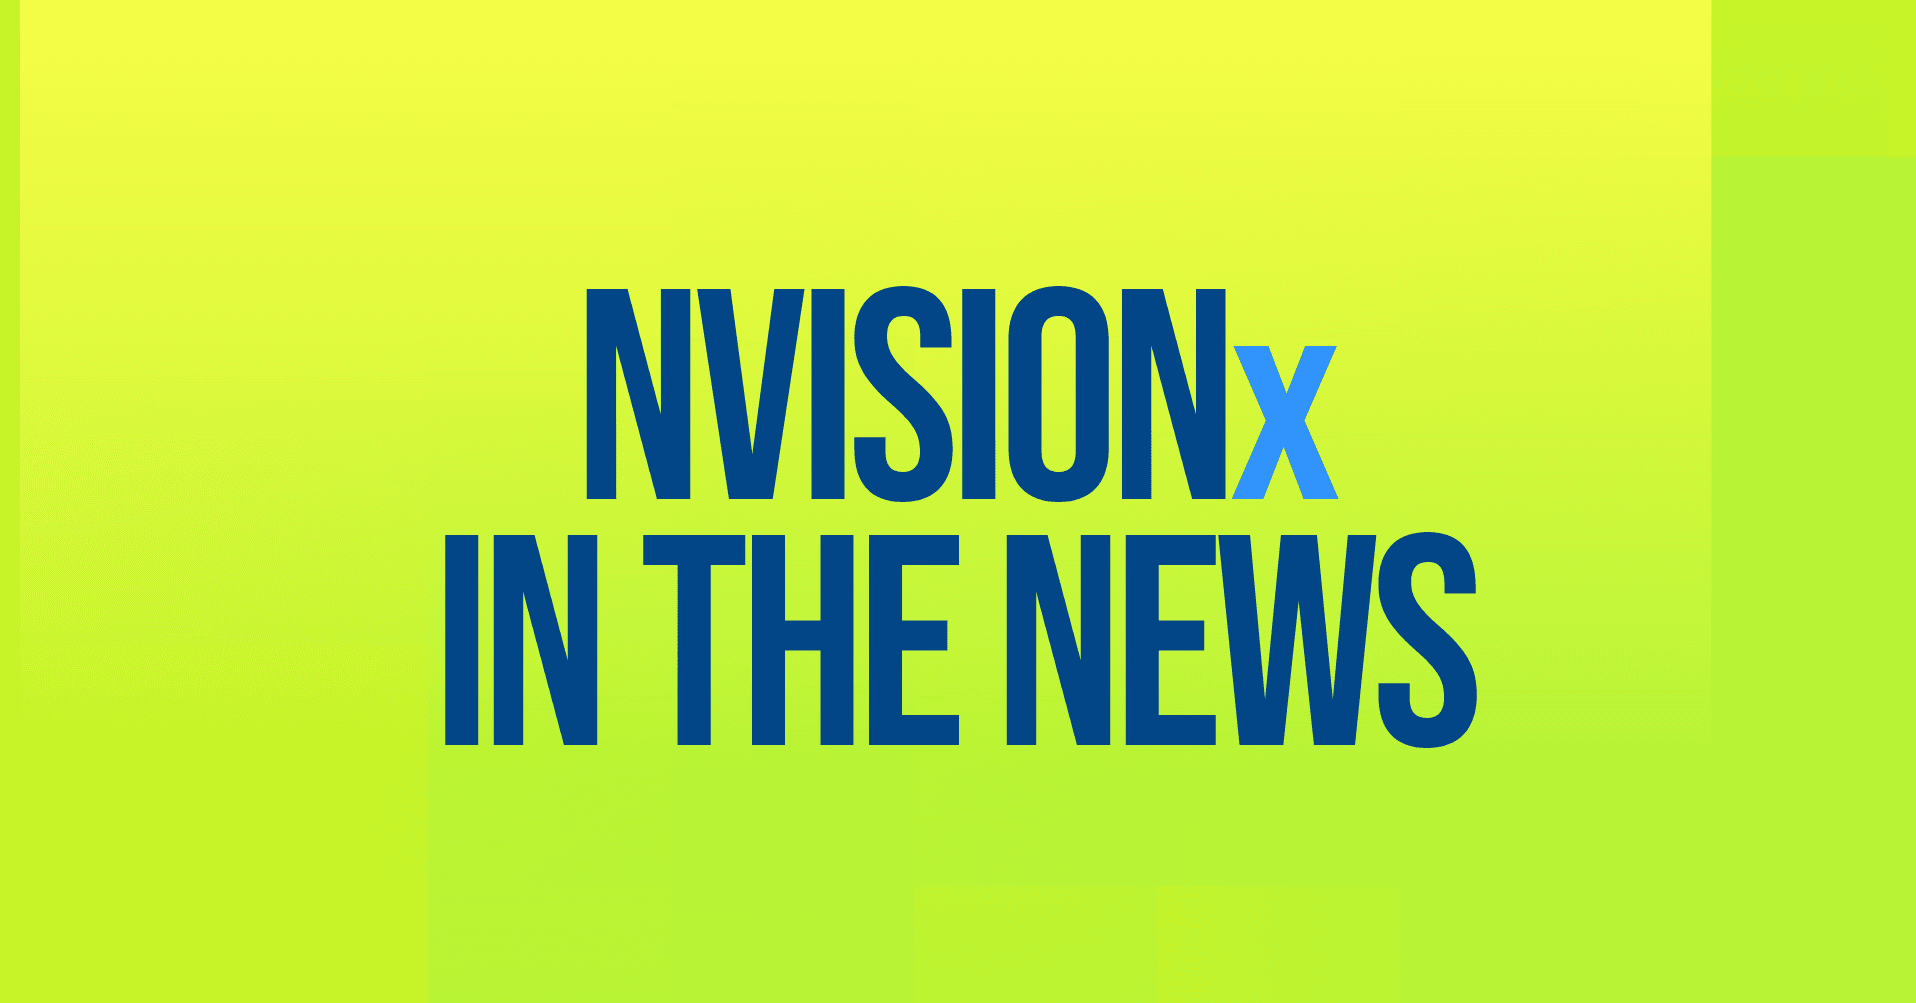 Product NVISIONx Raises $4.6M in Seed Round Led by Companyon Ventures, Bolstering Efforts to Expand Market Presence of Its Data Risk Intelligence Platform - NVISIONx image